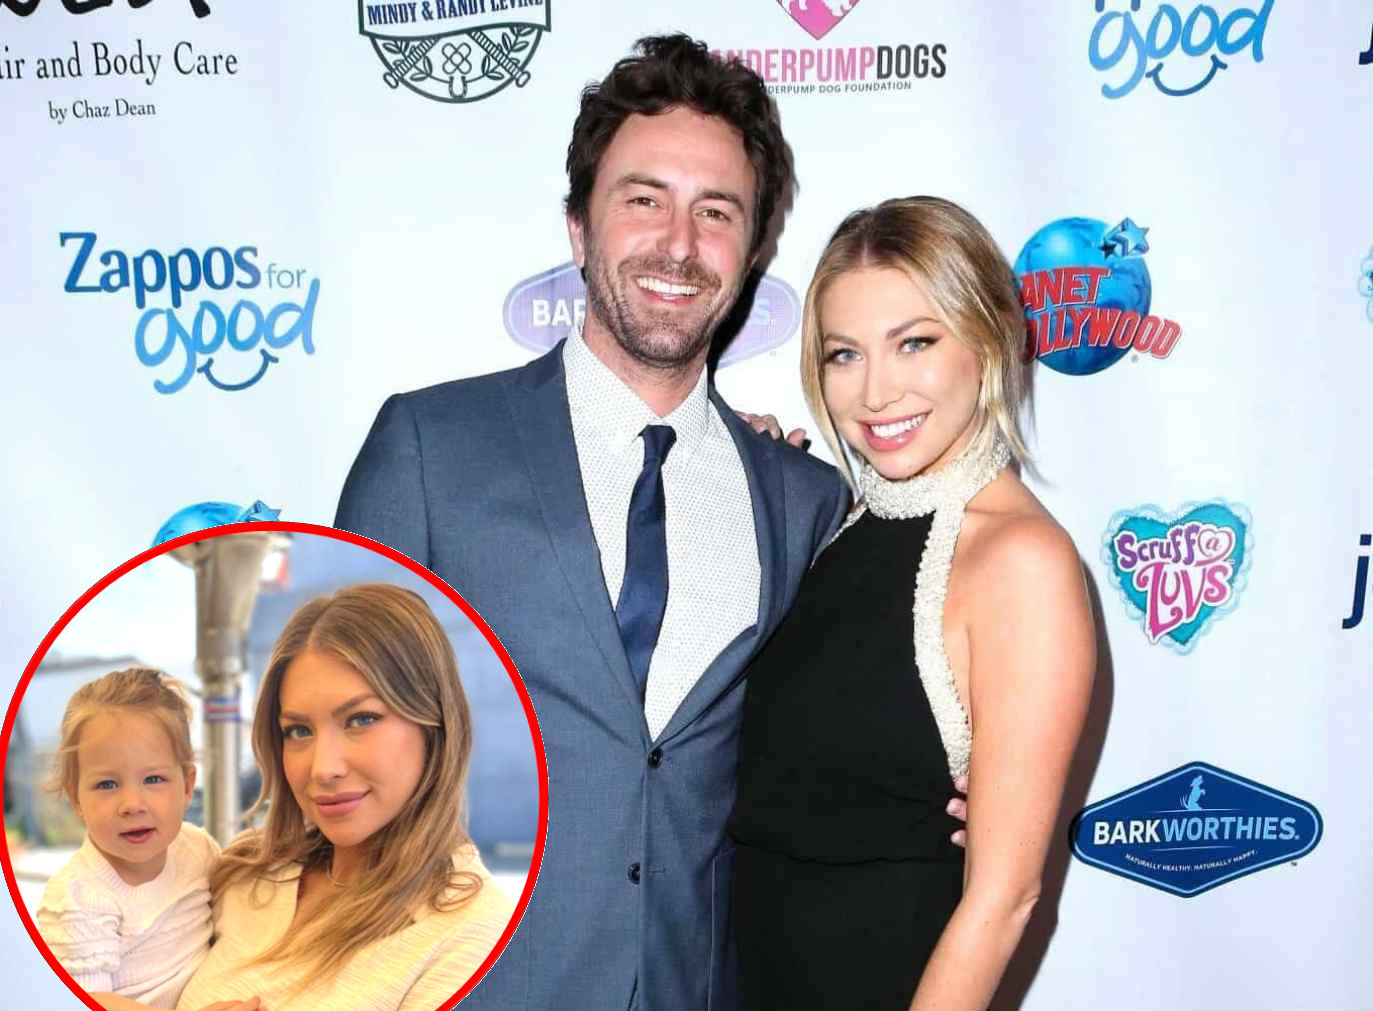 PHOTO: Stassi Schroeder's Daughter Hartford Hospitalized With Breathing Issues, See What Beau is Saying About the "Super Scary" Situation